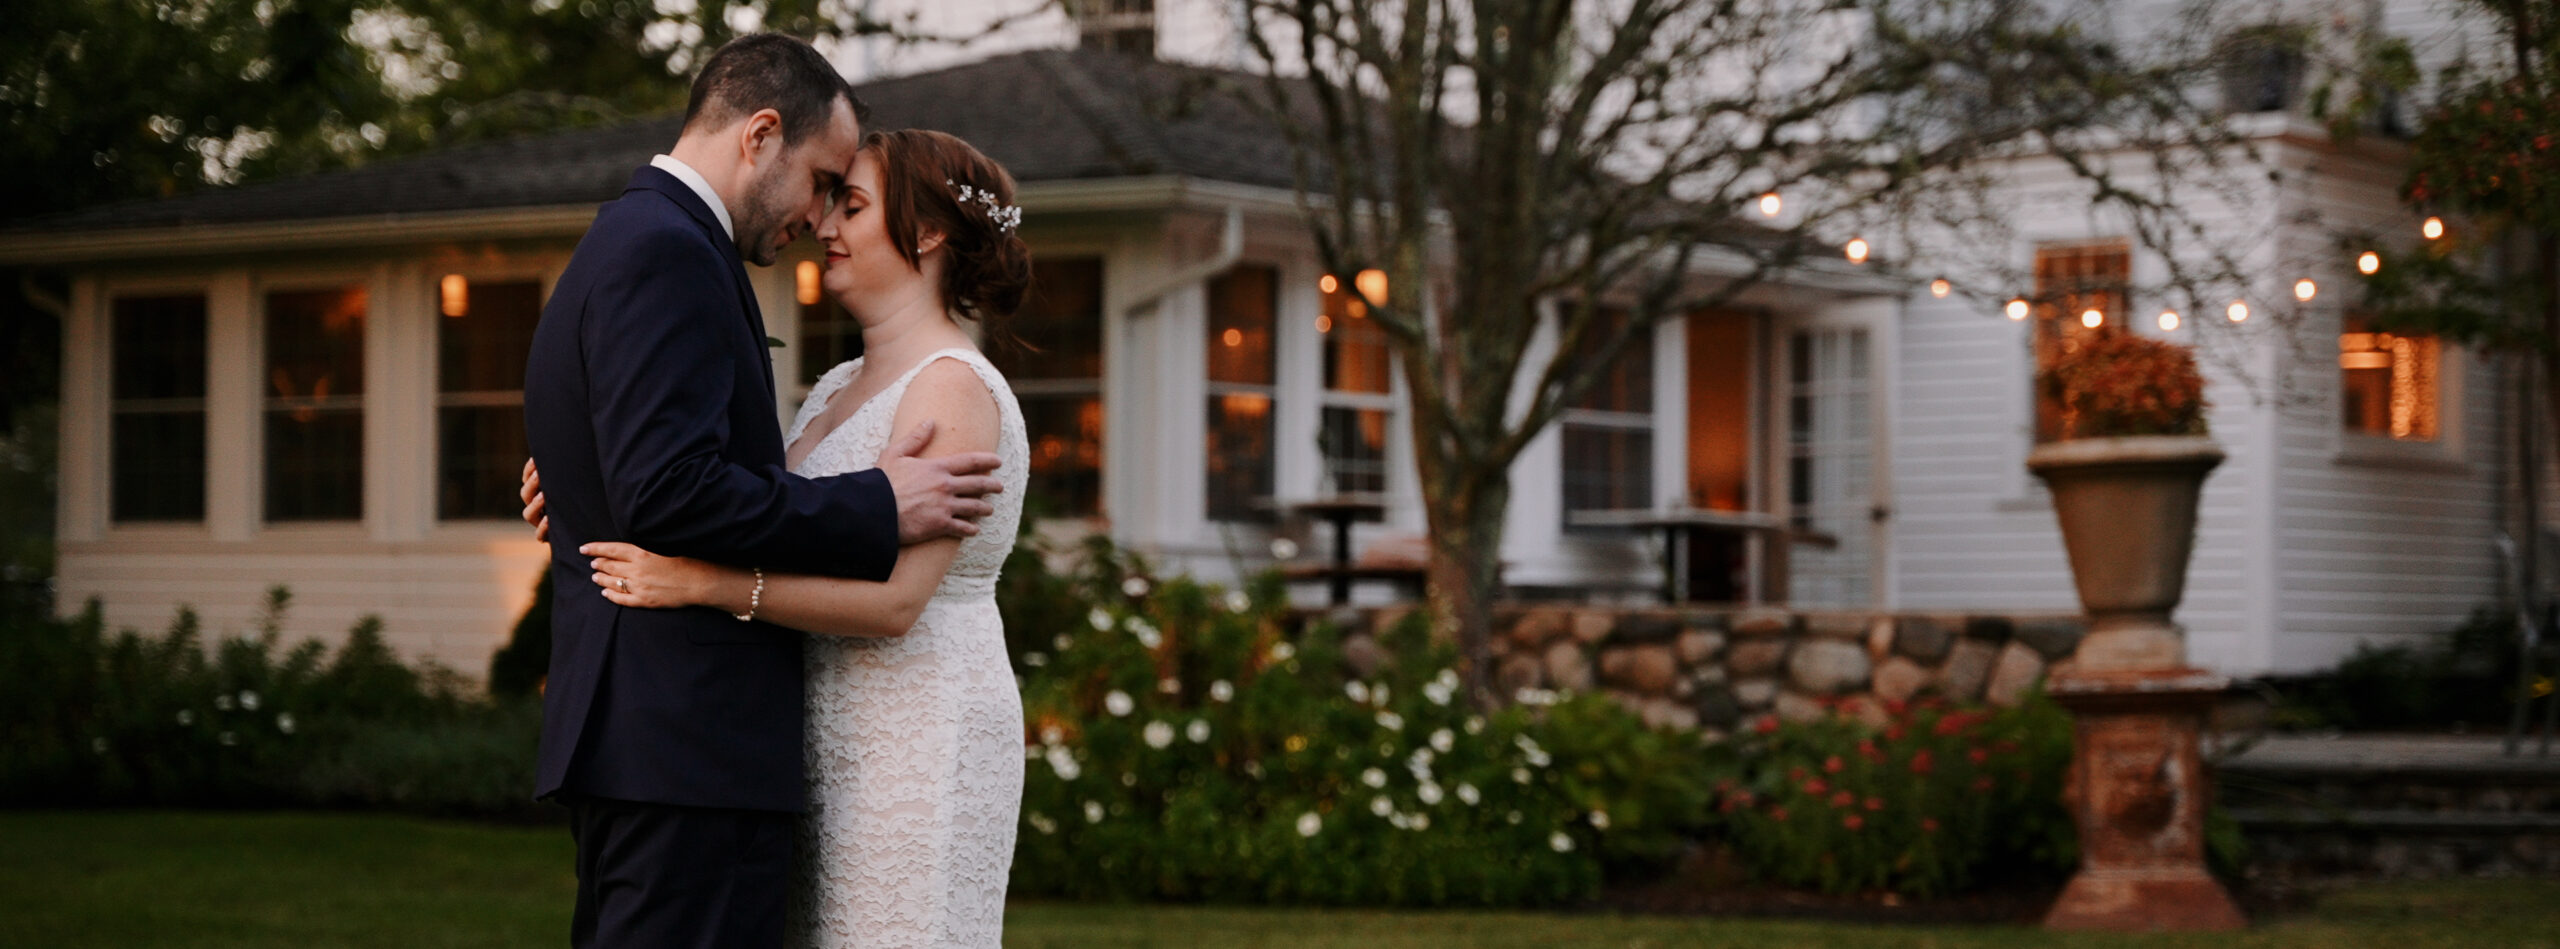 Couple standing facing each other kissing in front of a while house with trees around it. You can see the patio that has bistro lights hanging. Bride is wearing a lace dress that is fitted. Groom is wearing a dark blue suit.